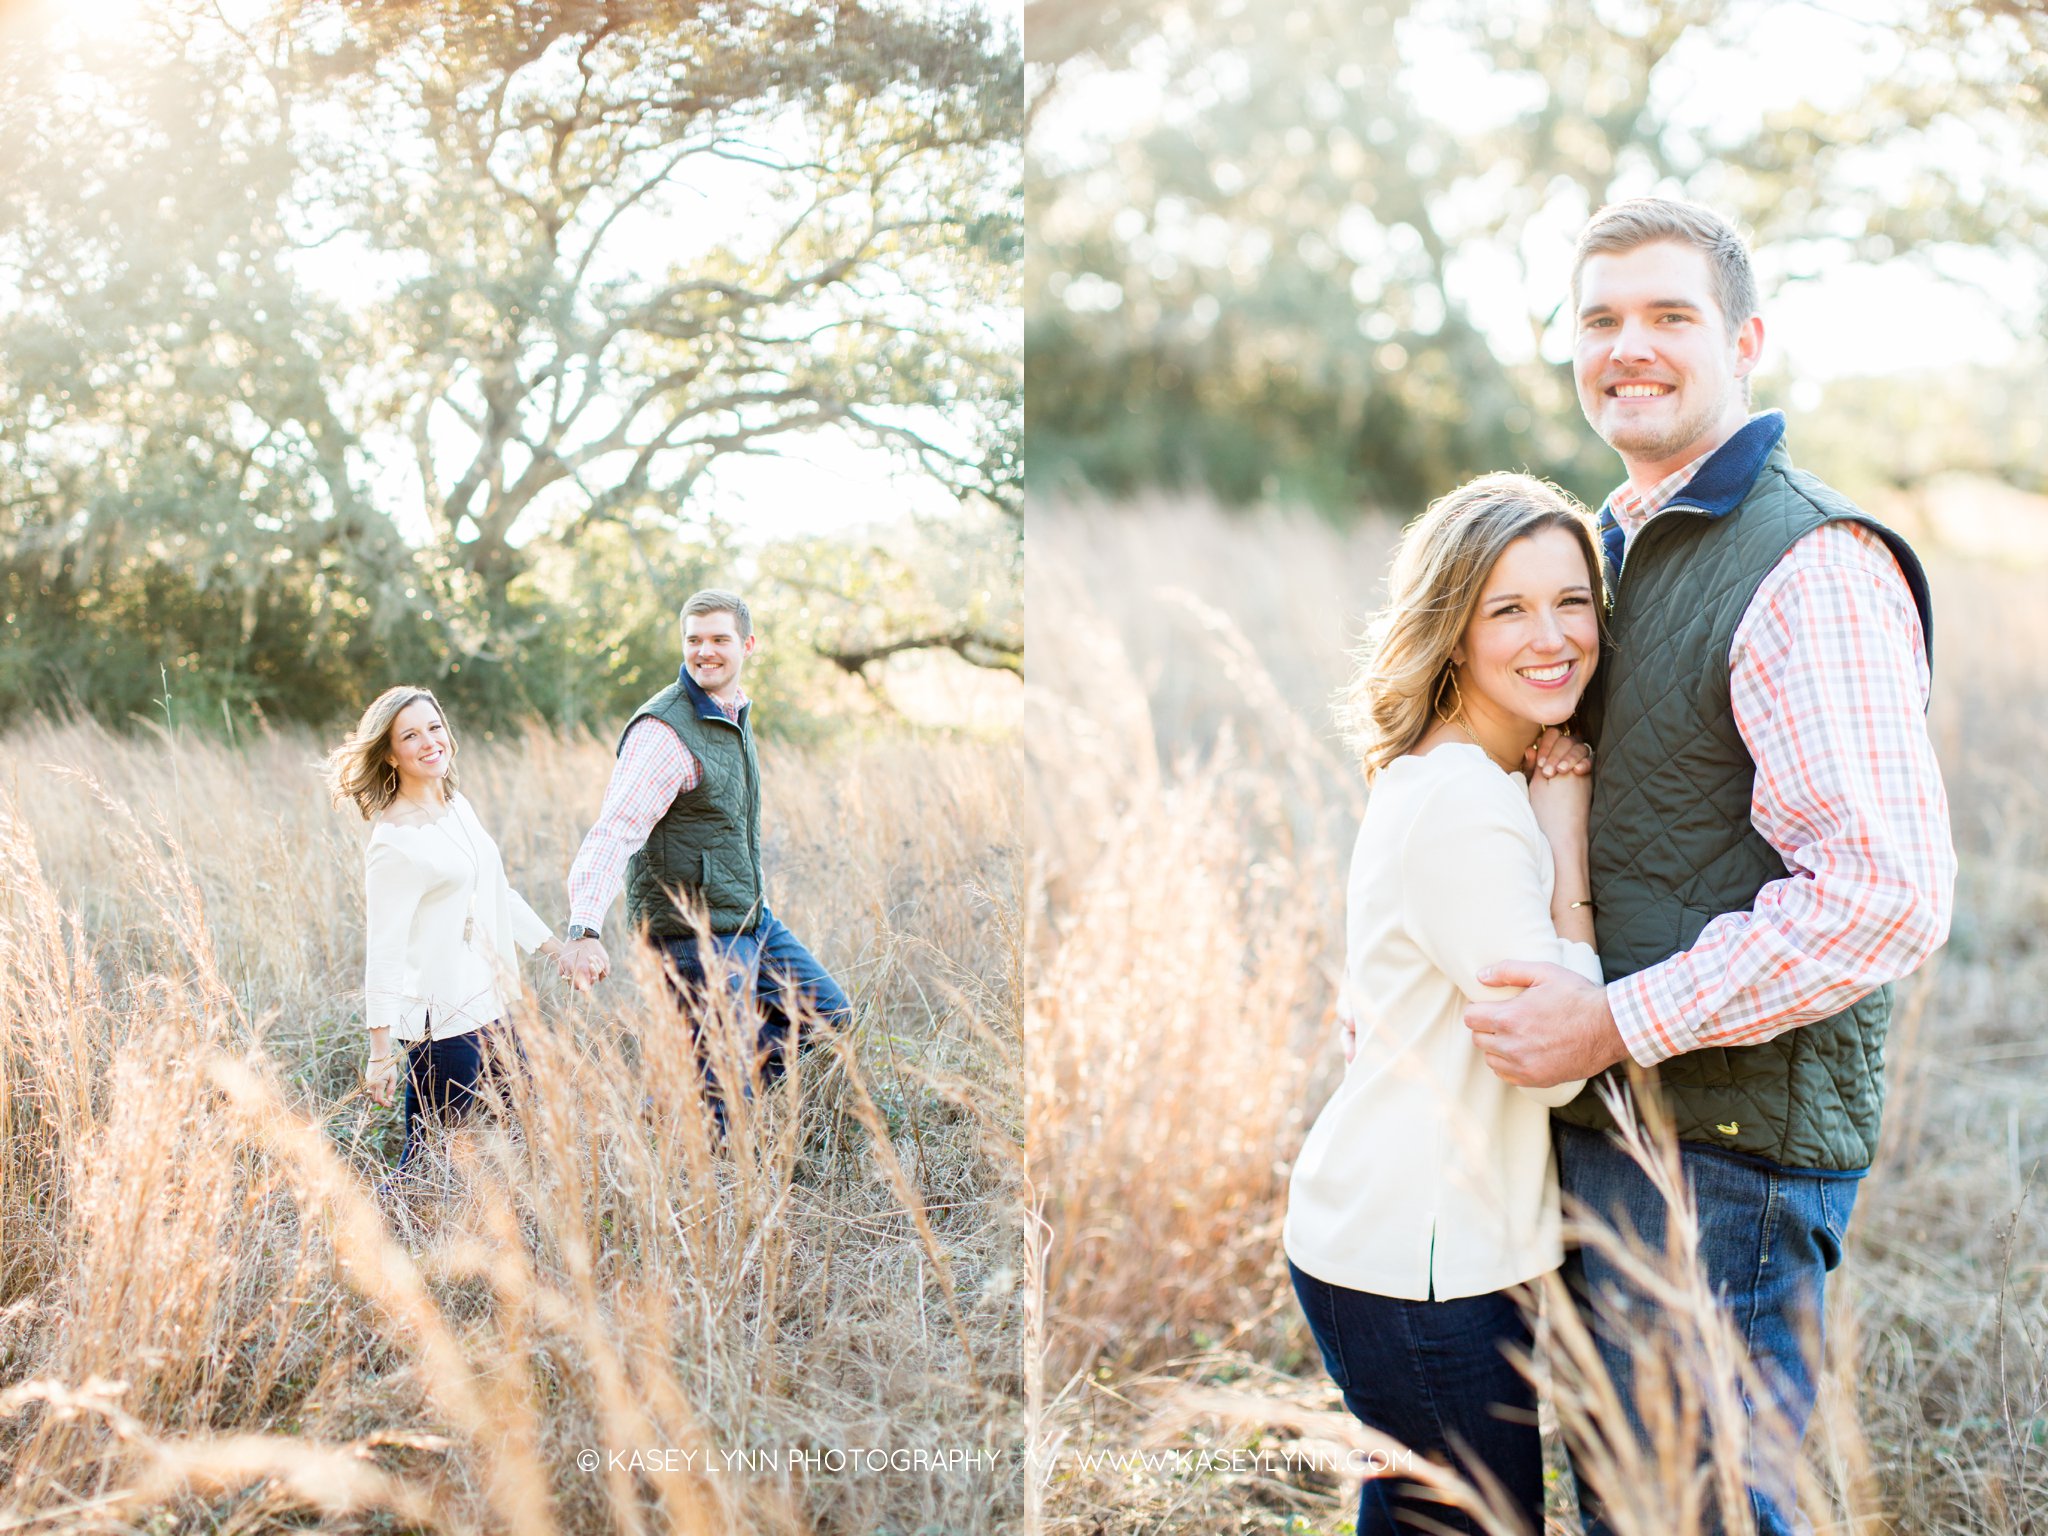 Field Engagement Session / Kasey Lynn Photography